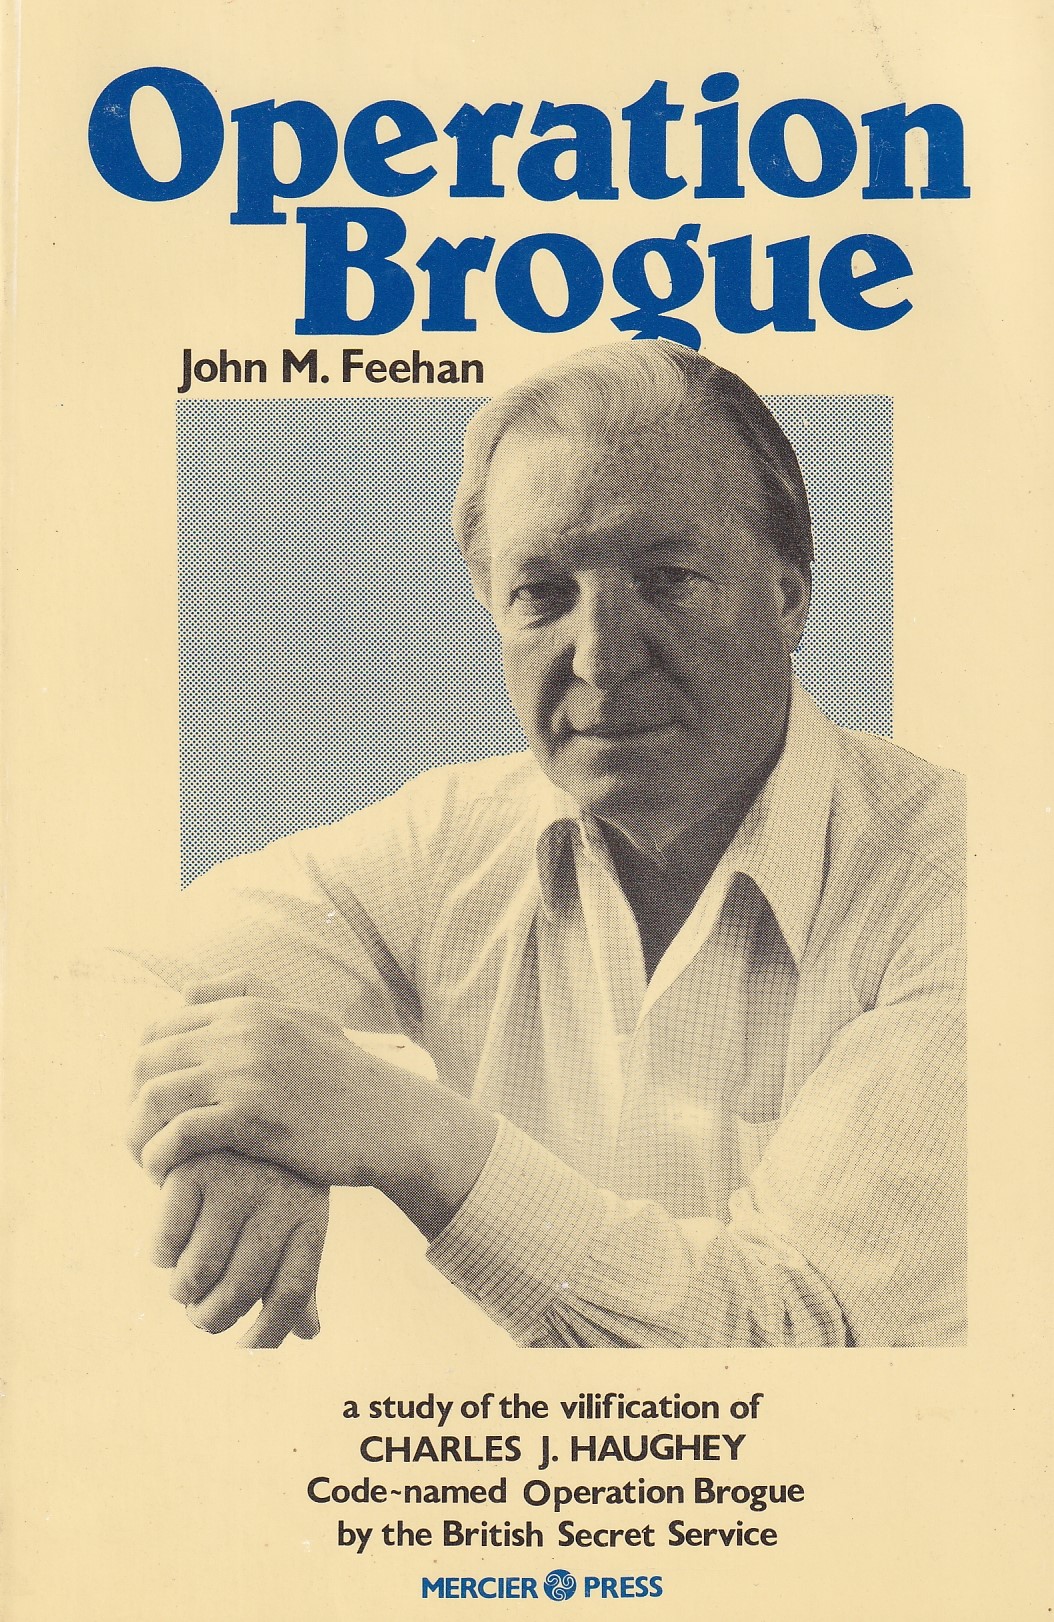 Operation Brogue: a study of the vilification of Charles J. Haughey code-named Operation Brogue by the British Secret Service | John M. Feehan | Charlie Byrne's